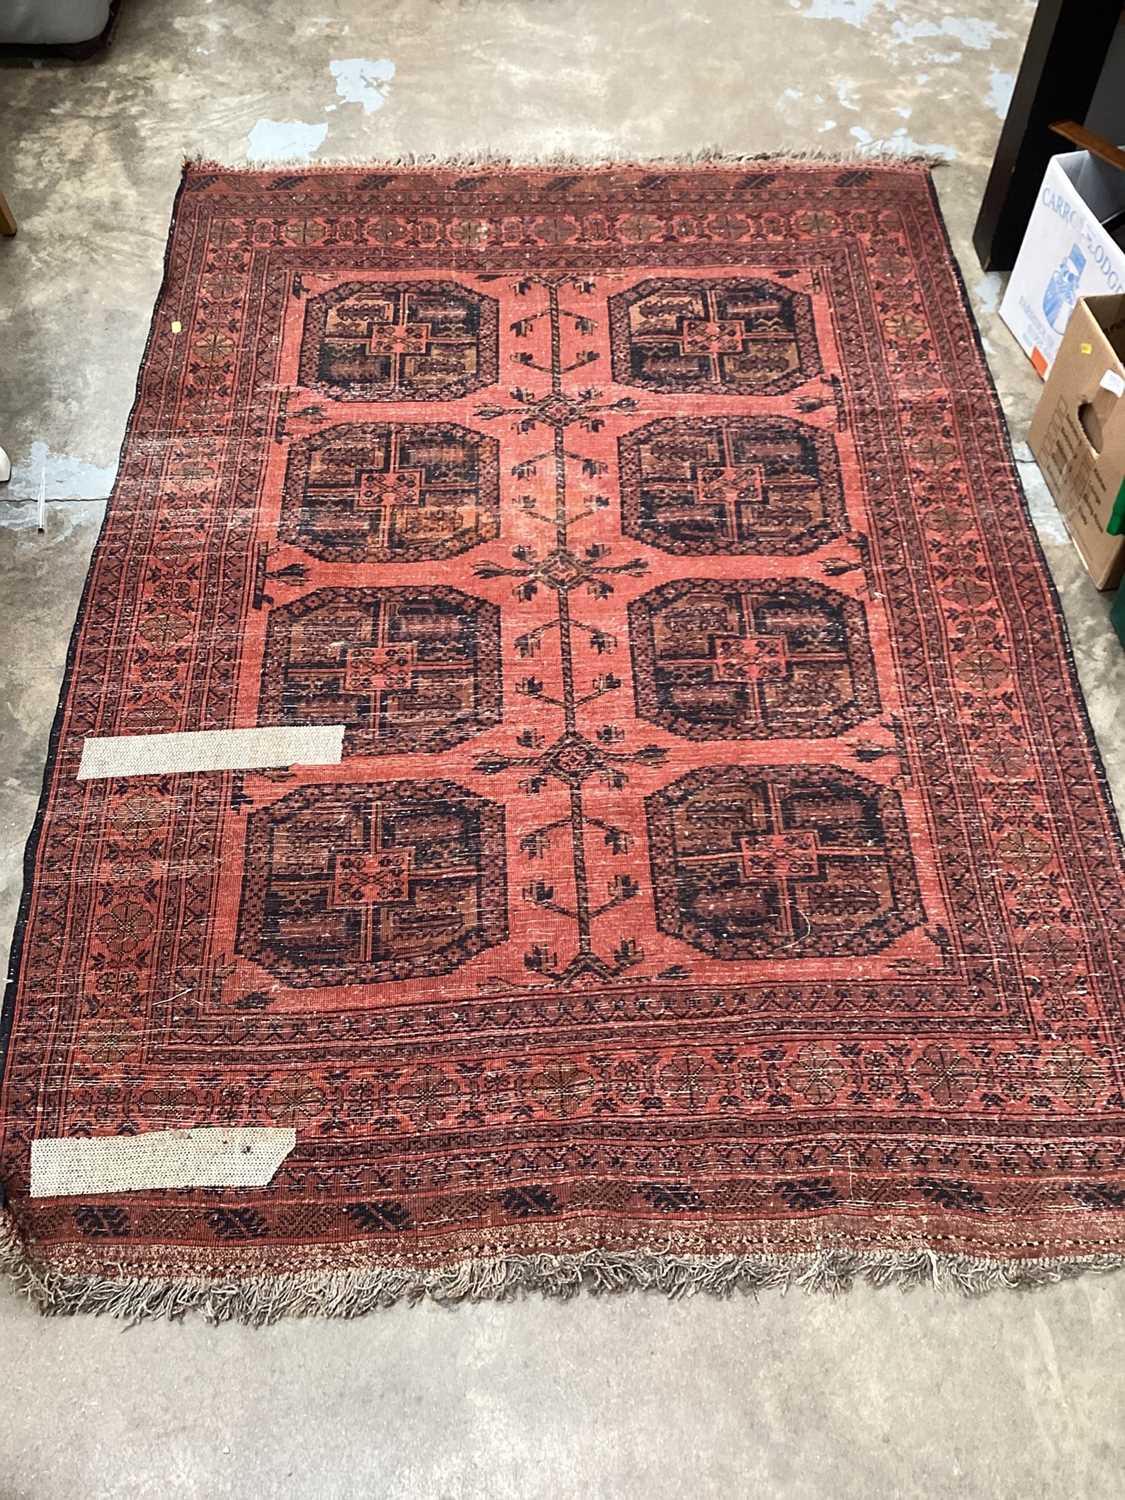 Eastern rug with eight medallions on red ground, 190cm x 135cm - Image 4 of 4